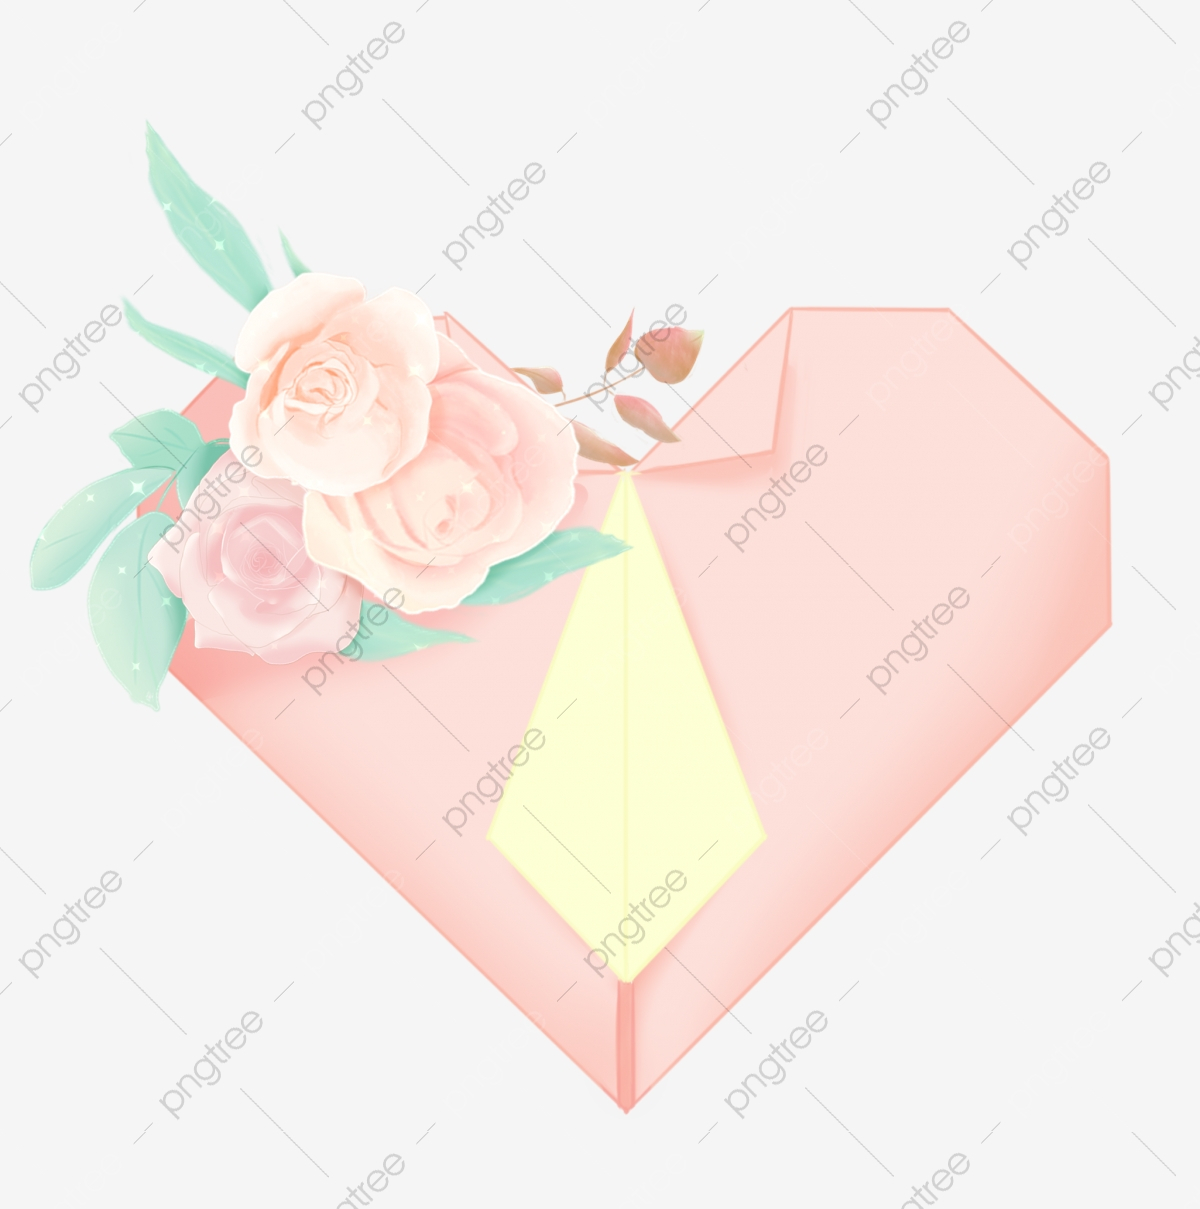 Heart Shaped Origami Valentines Day Rose Heart Shaped Origami Pink Romantic Color